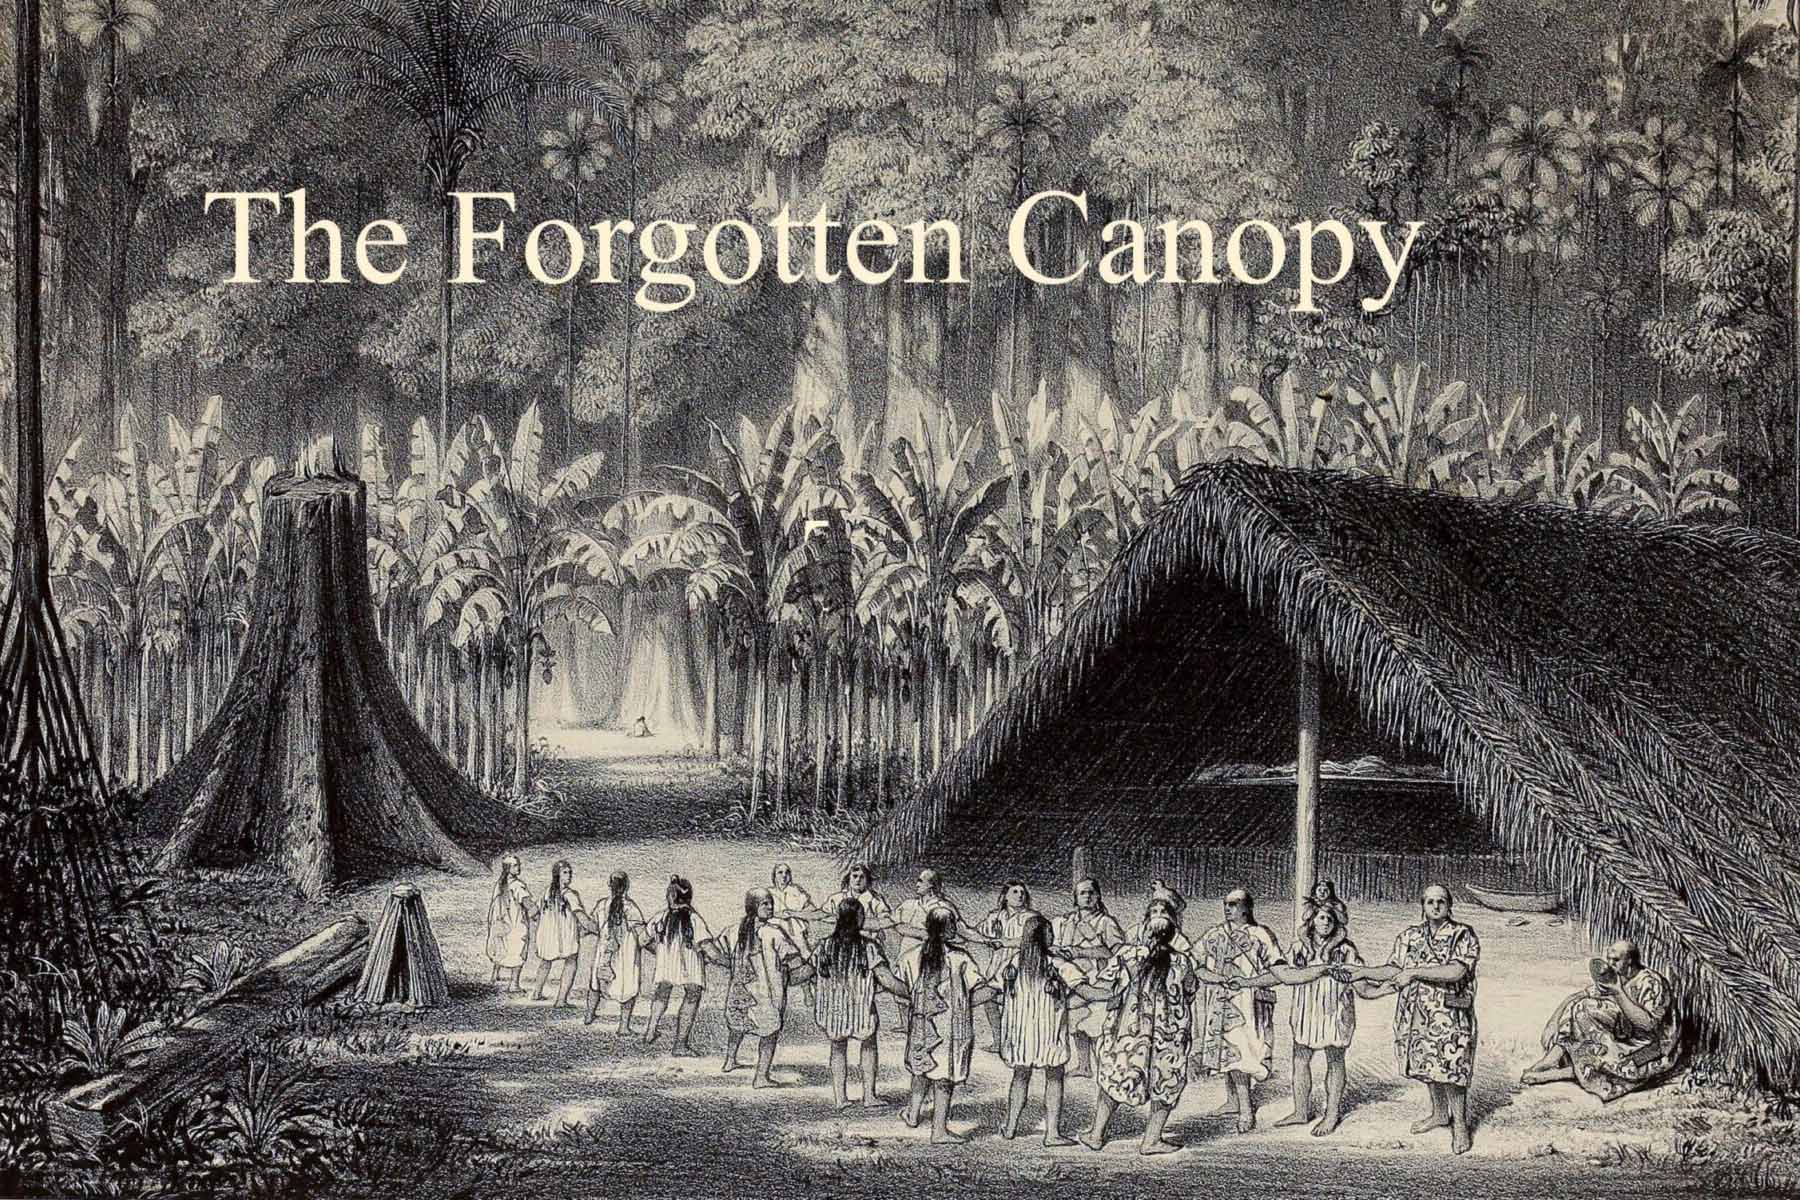 A black and white illustration of indigenous peoples in front of a thatch structure. The text "The Forgotten Canopy" is at the top in off-white. 